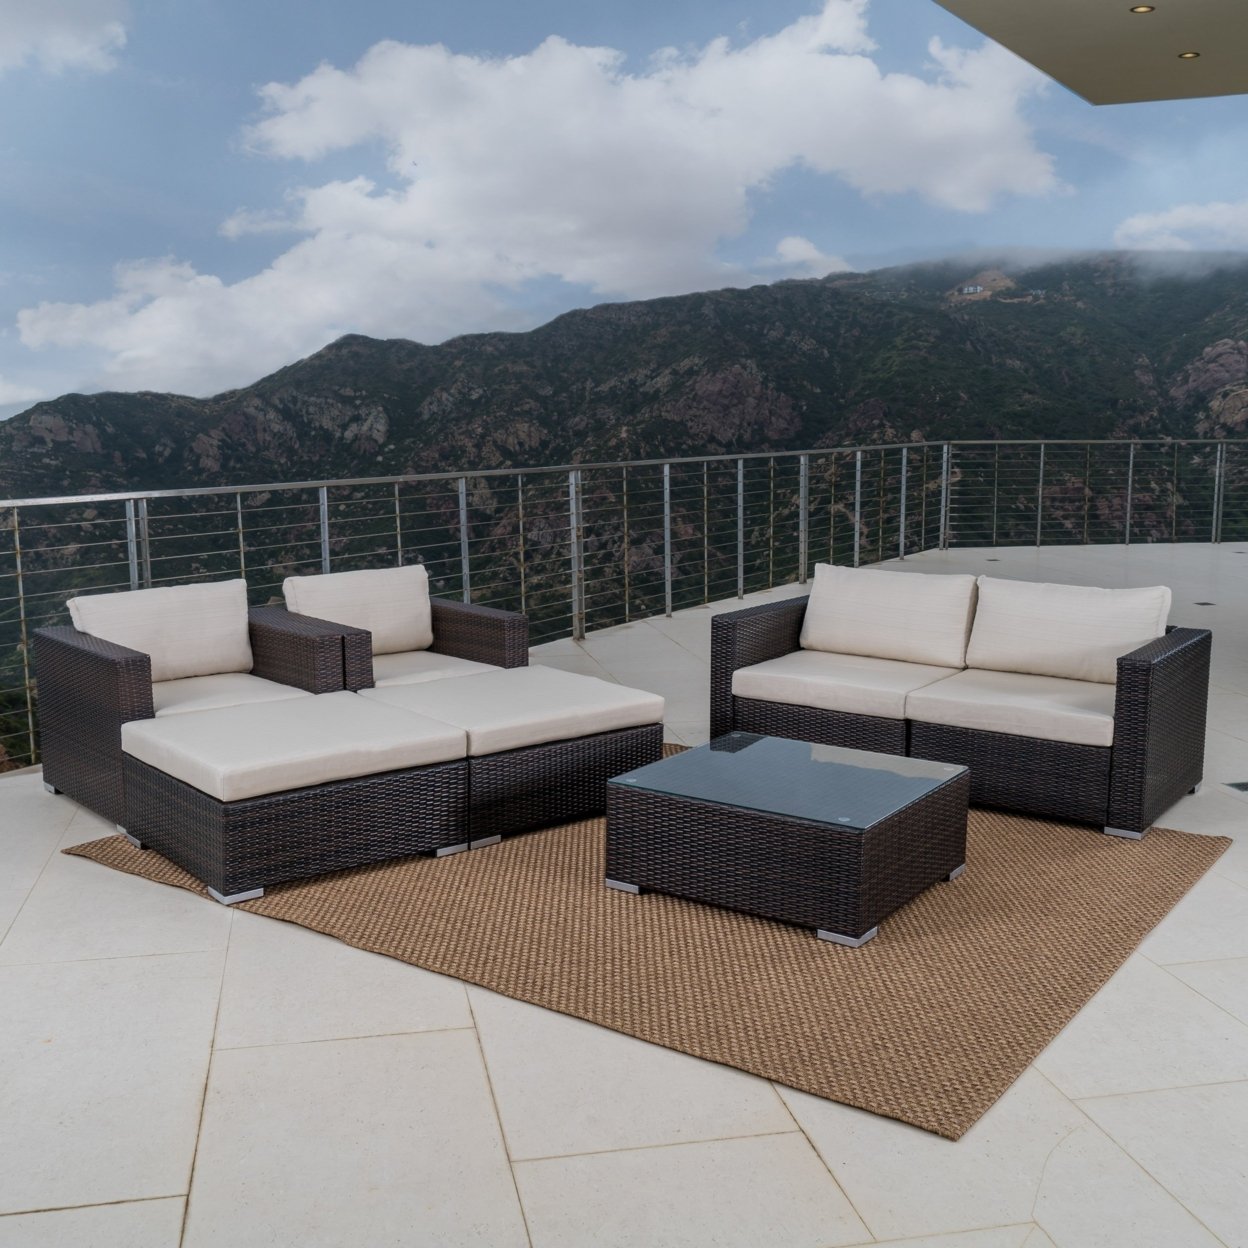 Francisco Outdoor Wicker Sectional With Cushions - Multibrown/Beige, 10 Piece Set